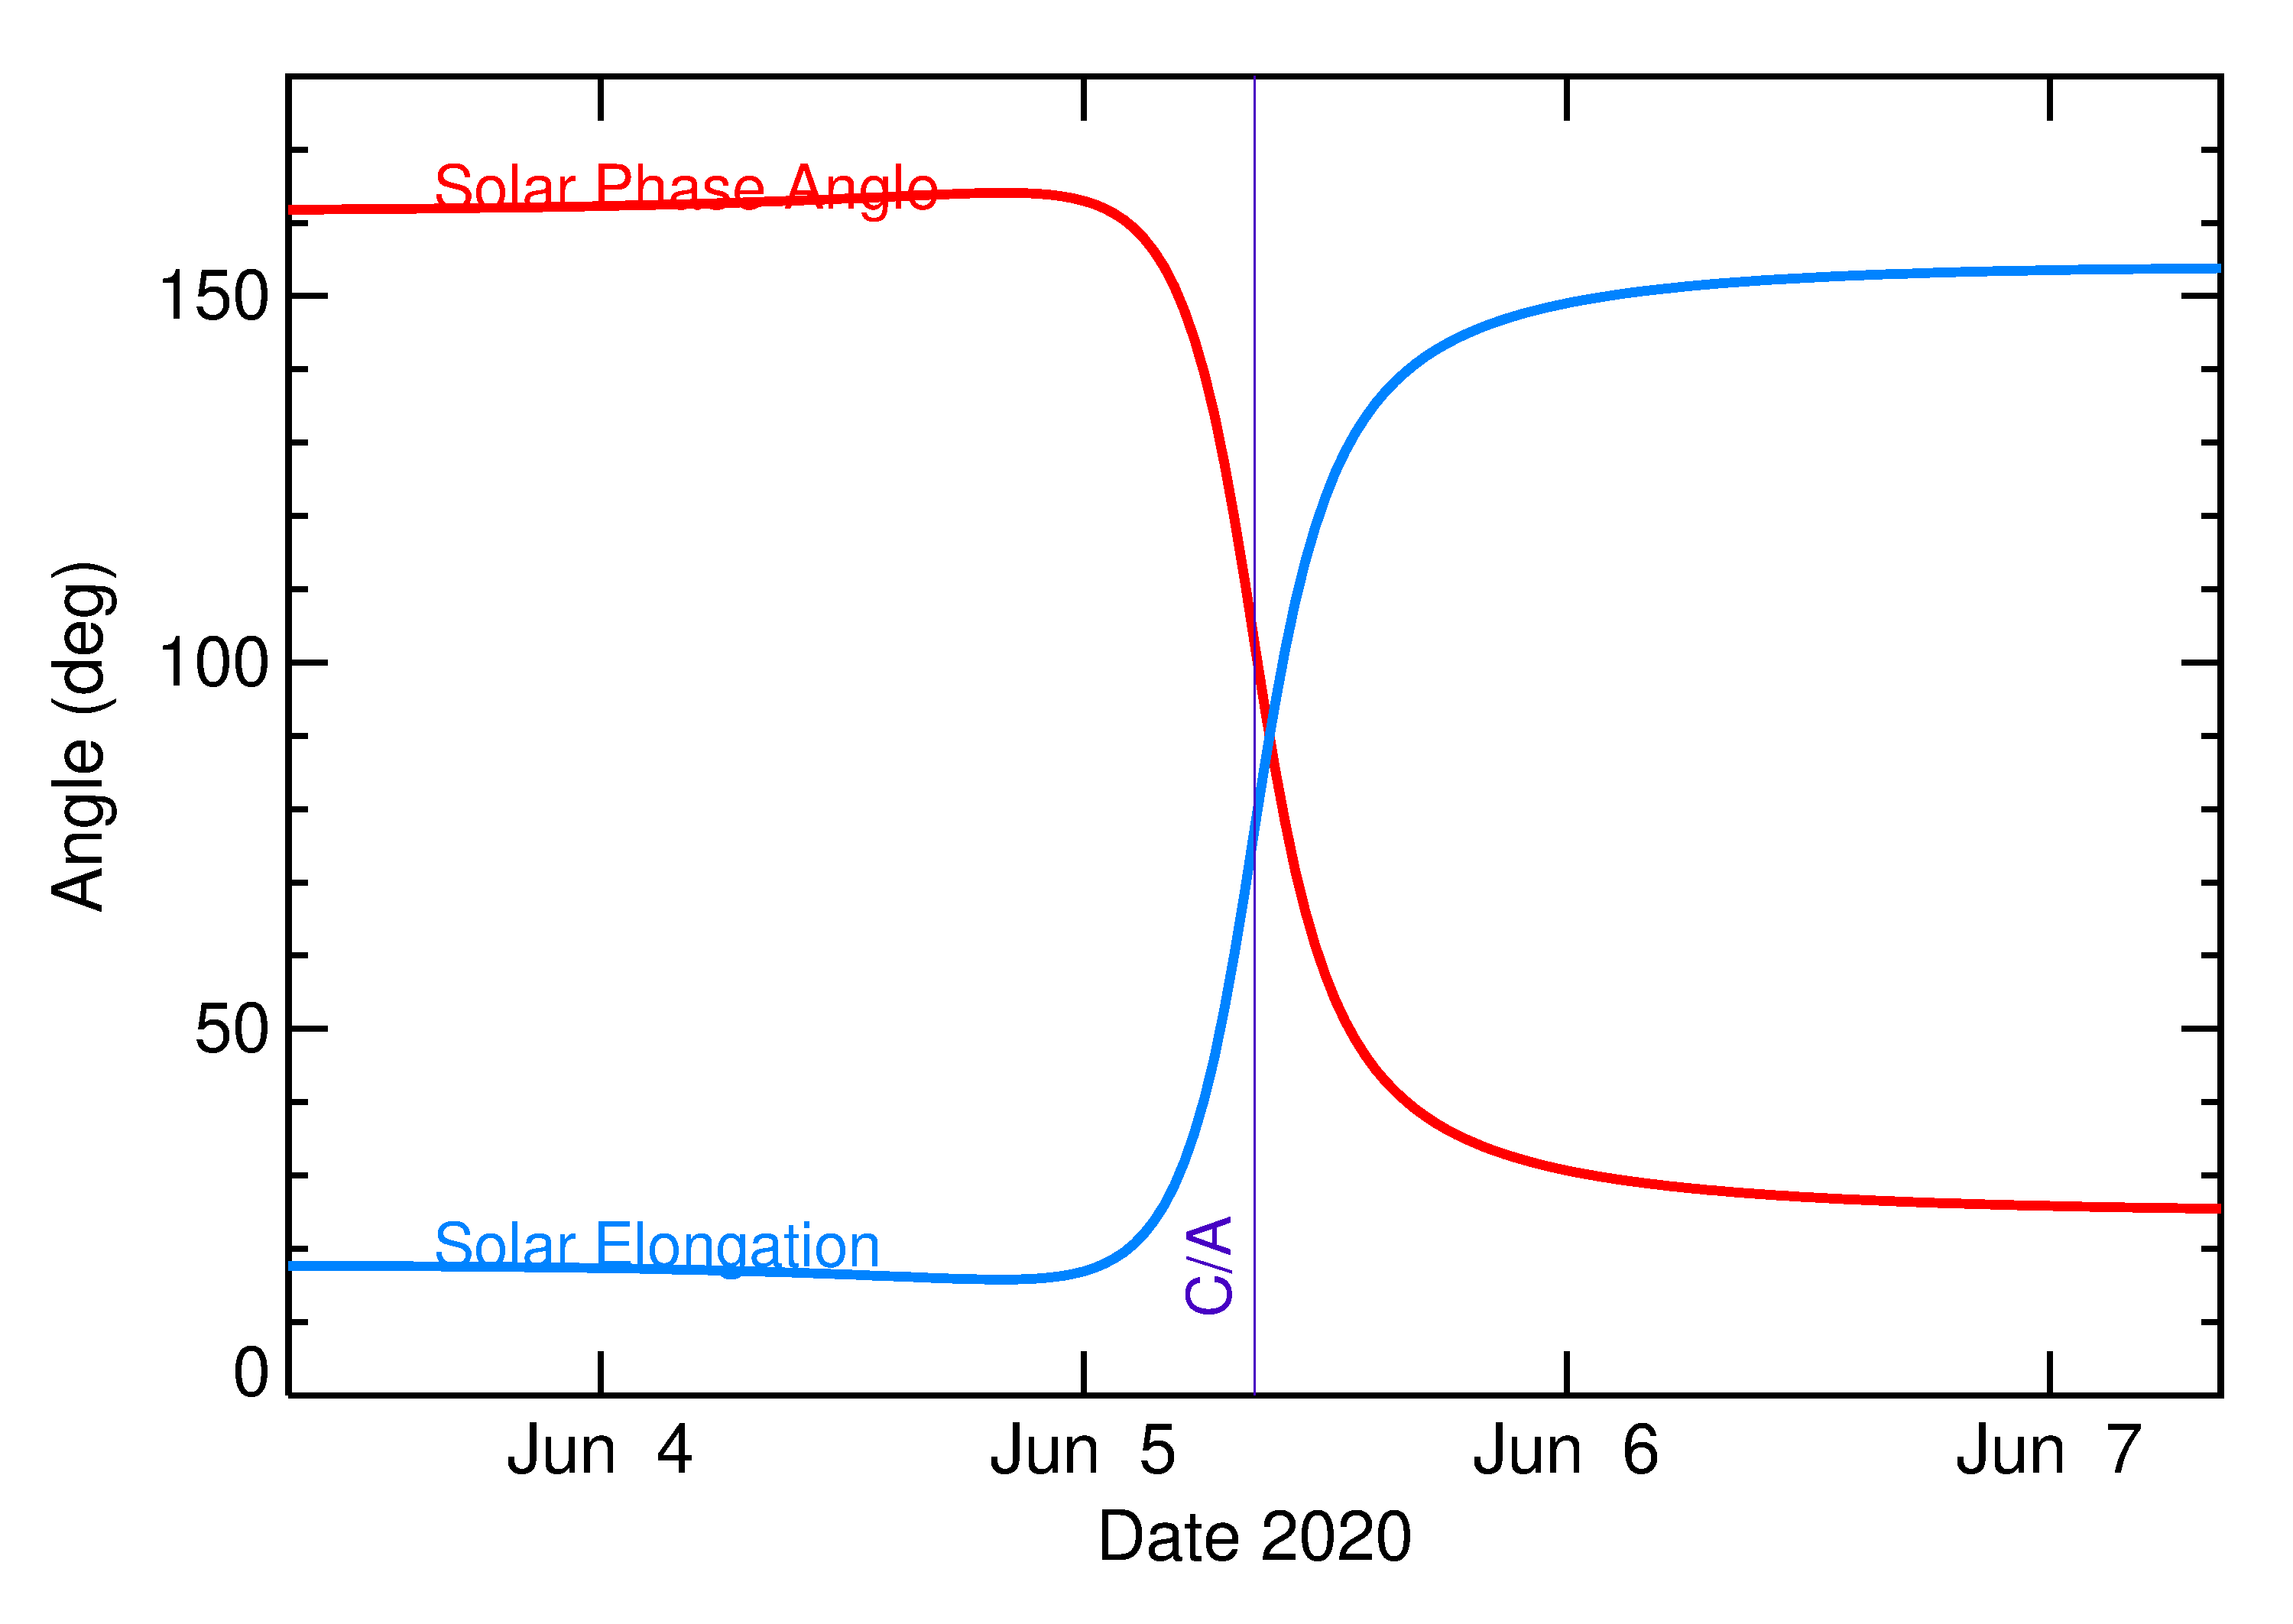 Solar Elongation and Solar Phase Angle of 2020 LD in the days around closest approach